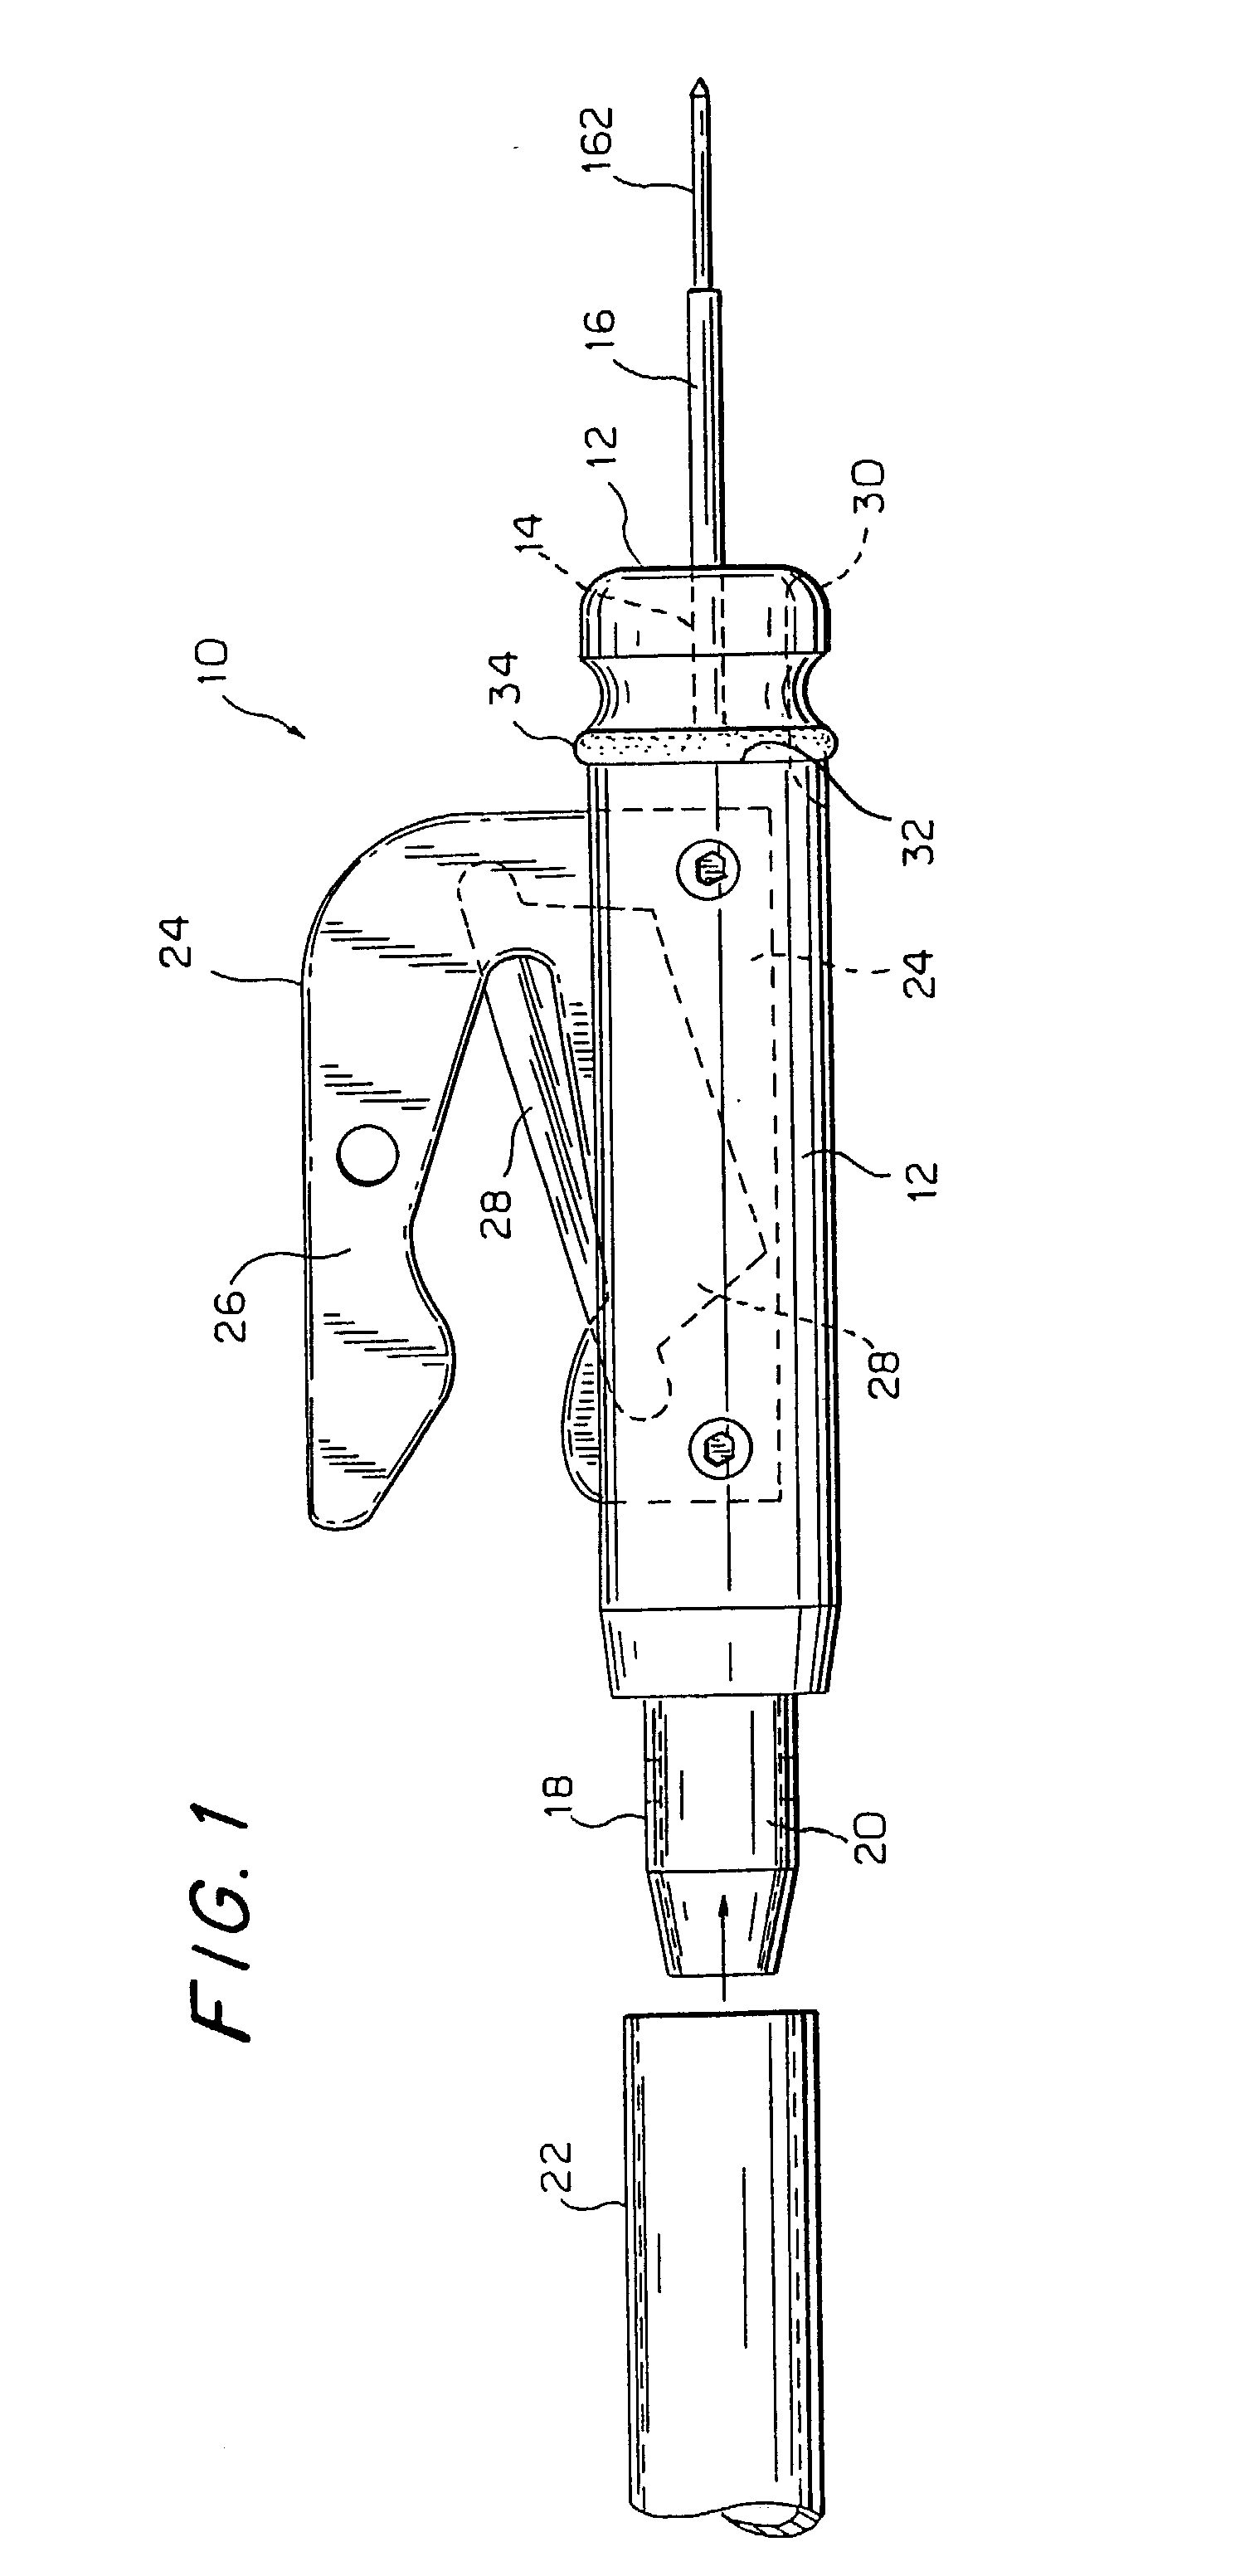 Tag and release device